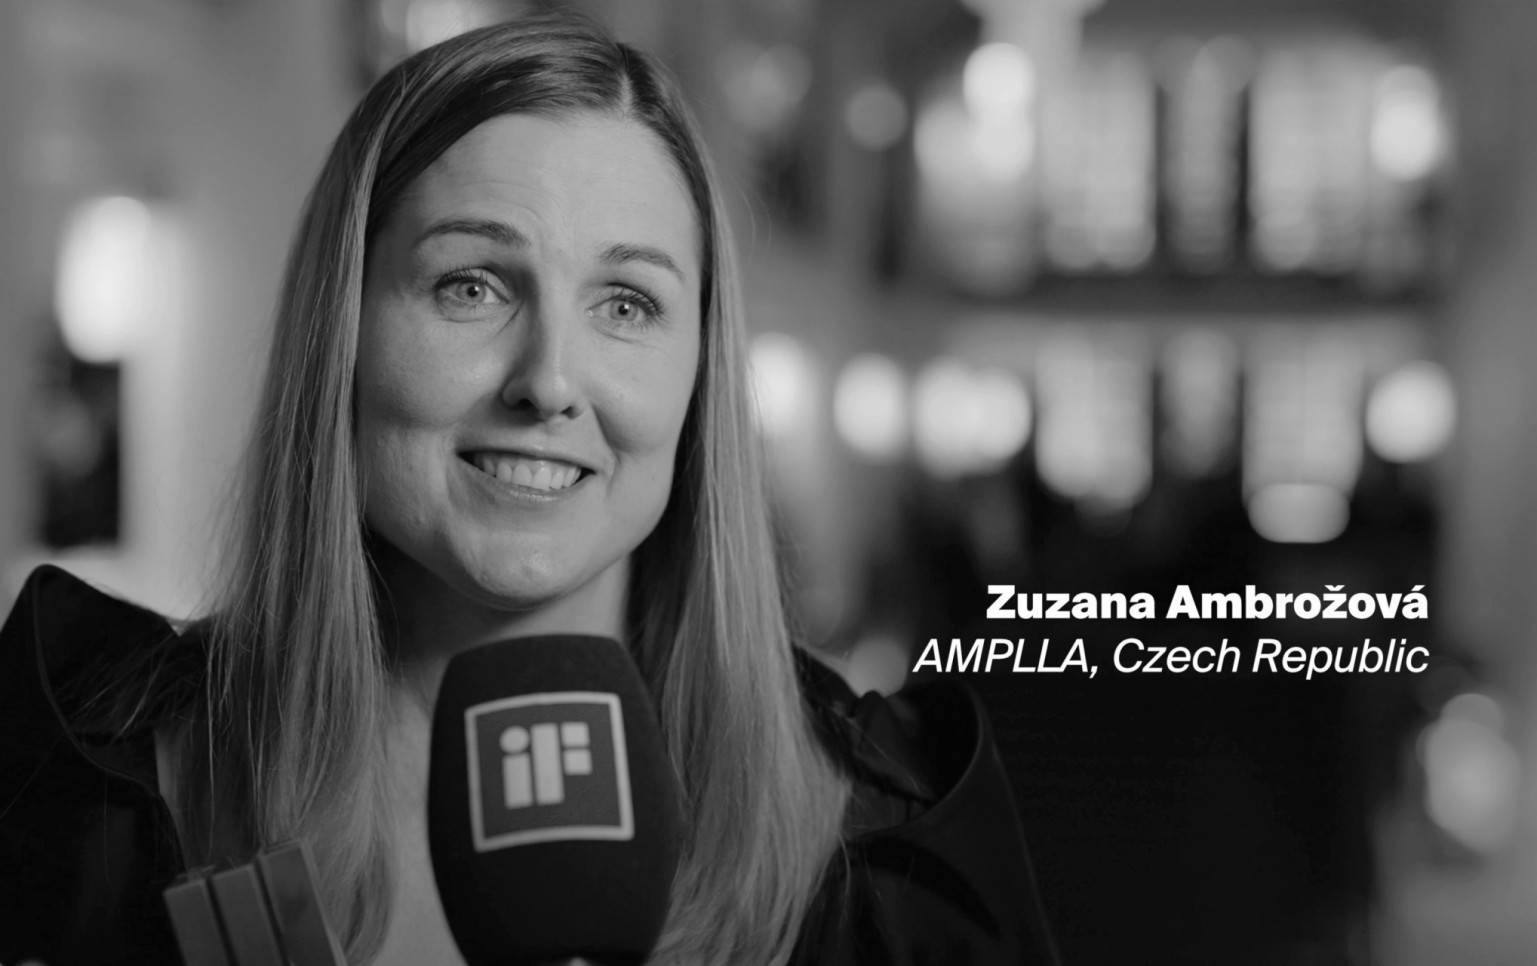 iF DESIGN AWARD NIGHT: Together with her team, Zuzana Ambrožová receives an iF DESIGN AWARD Gold 2022 for HUSSECHUCK - a fire extinguisher designed by AMPLLA.